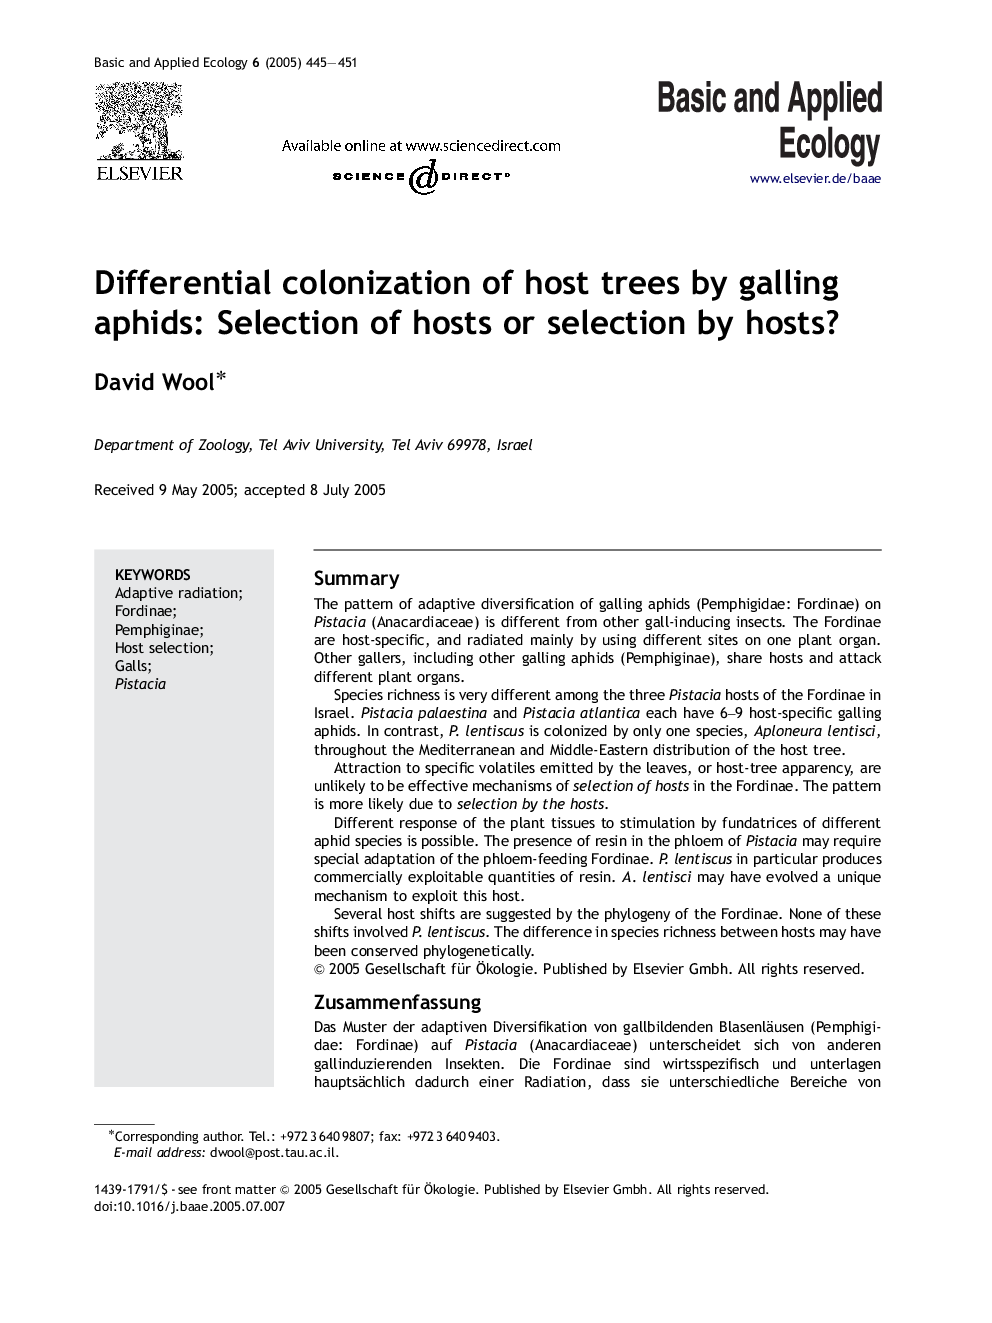 Differential colonization of host trees by galling aphids: Selection of hosts or selection by hosts?